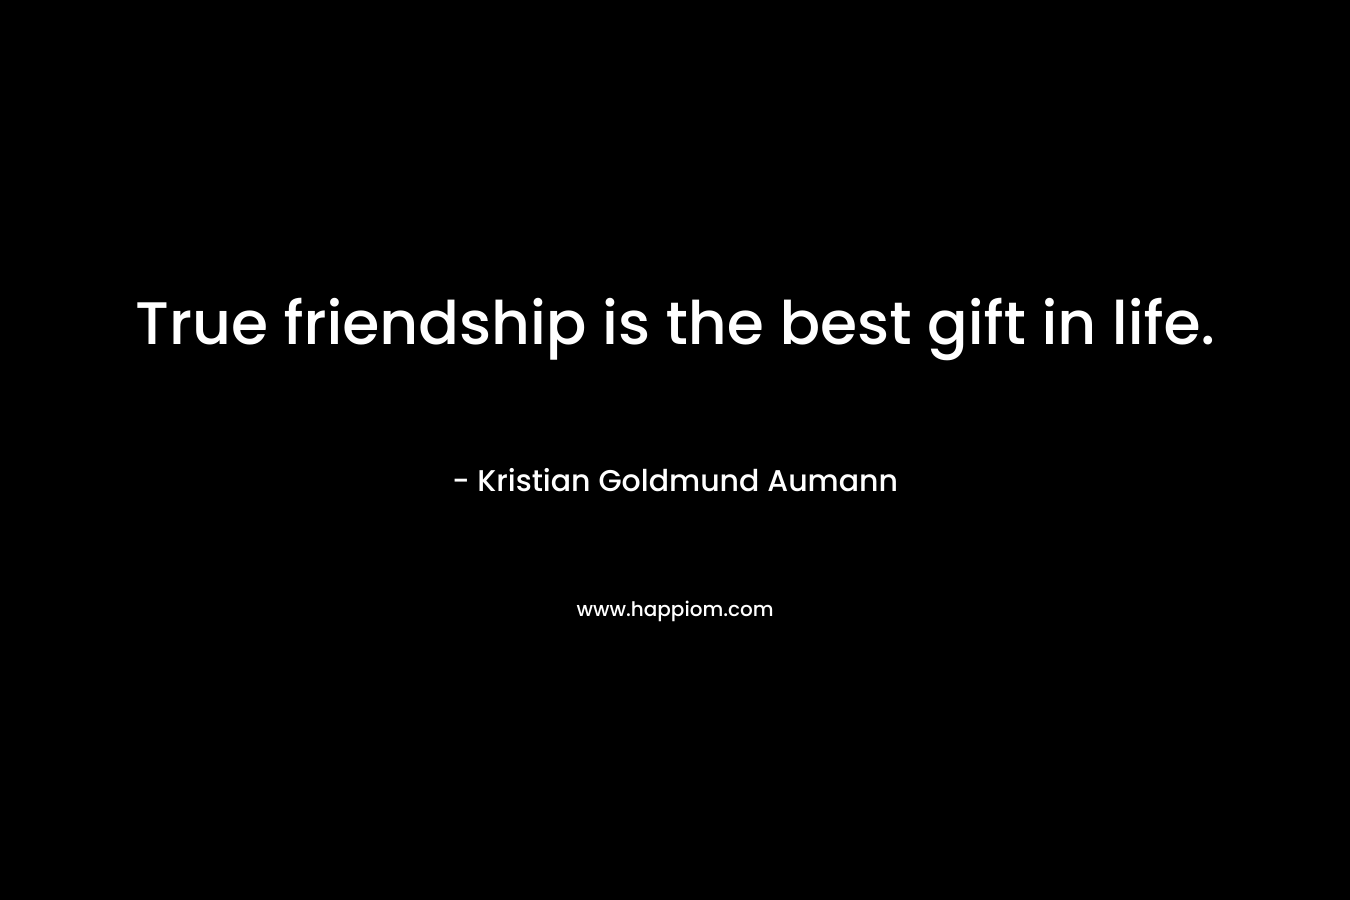 True friendship is the best gift in life.